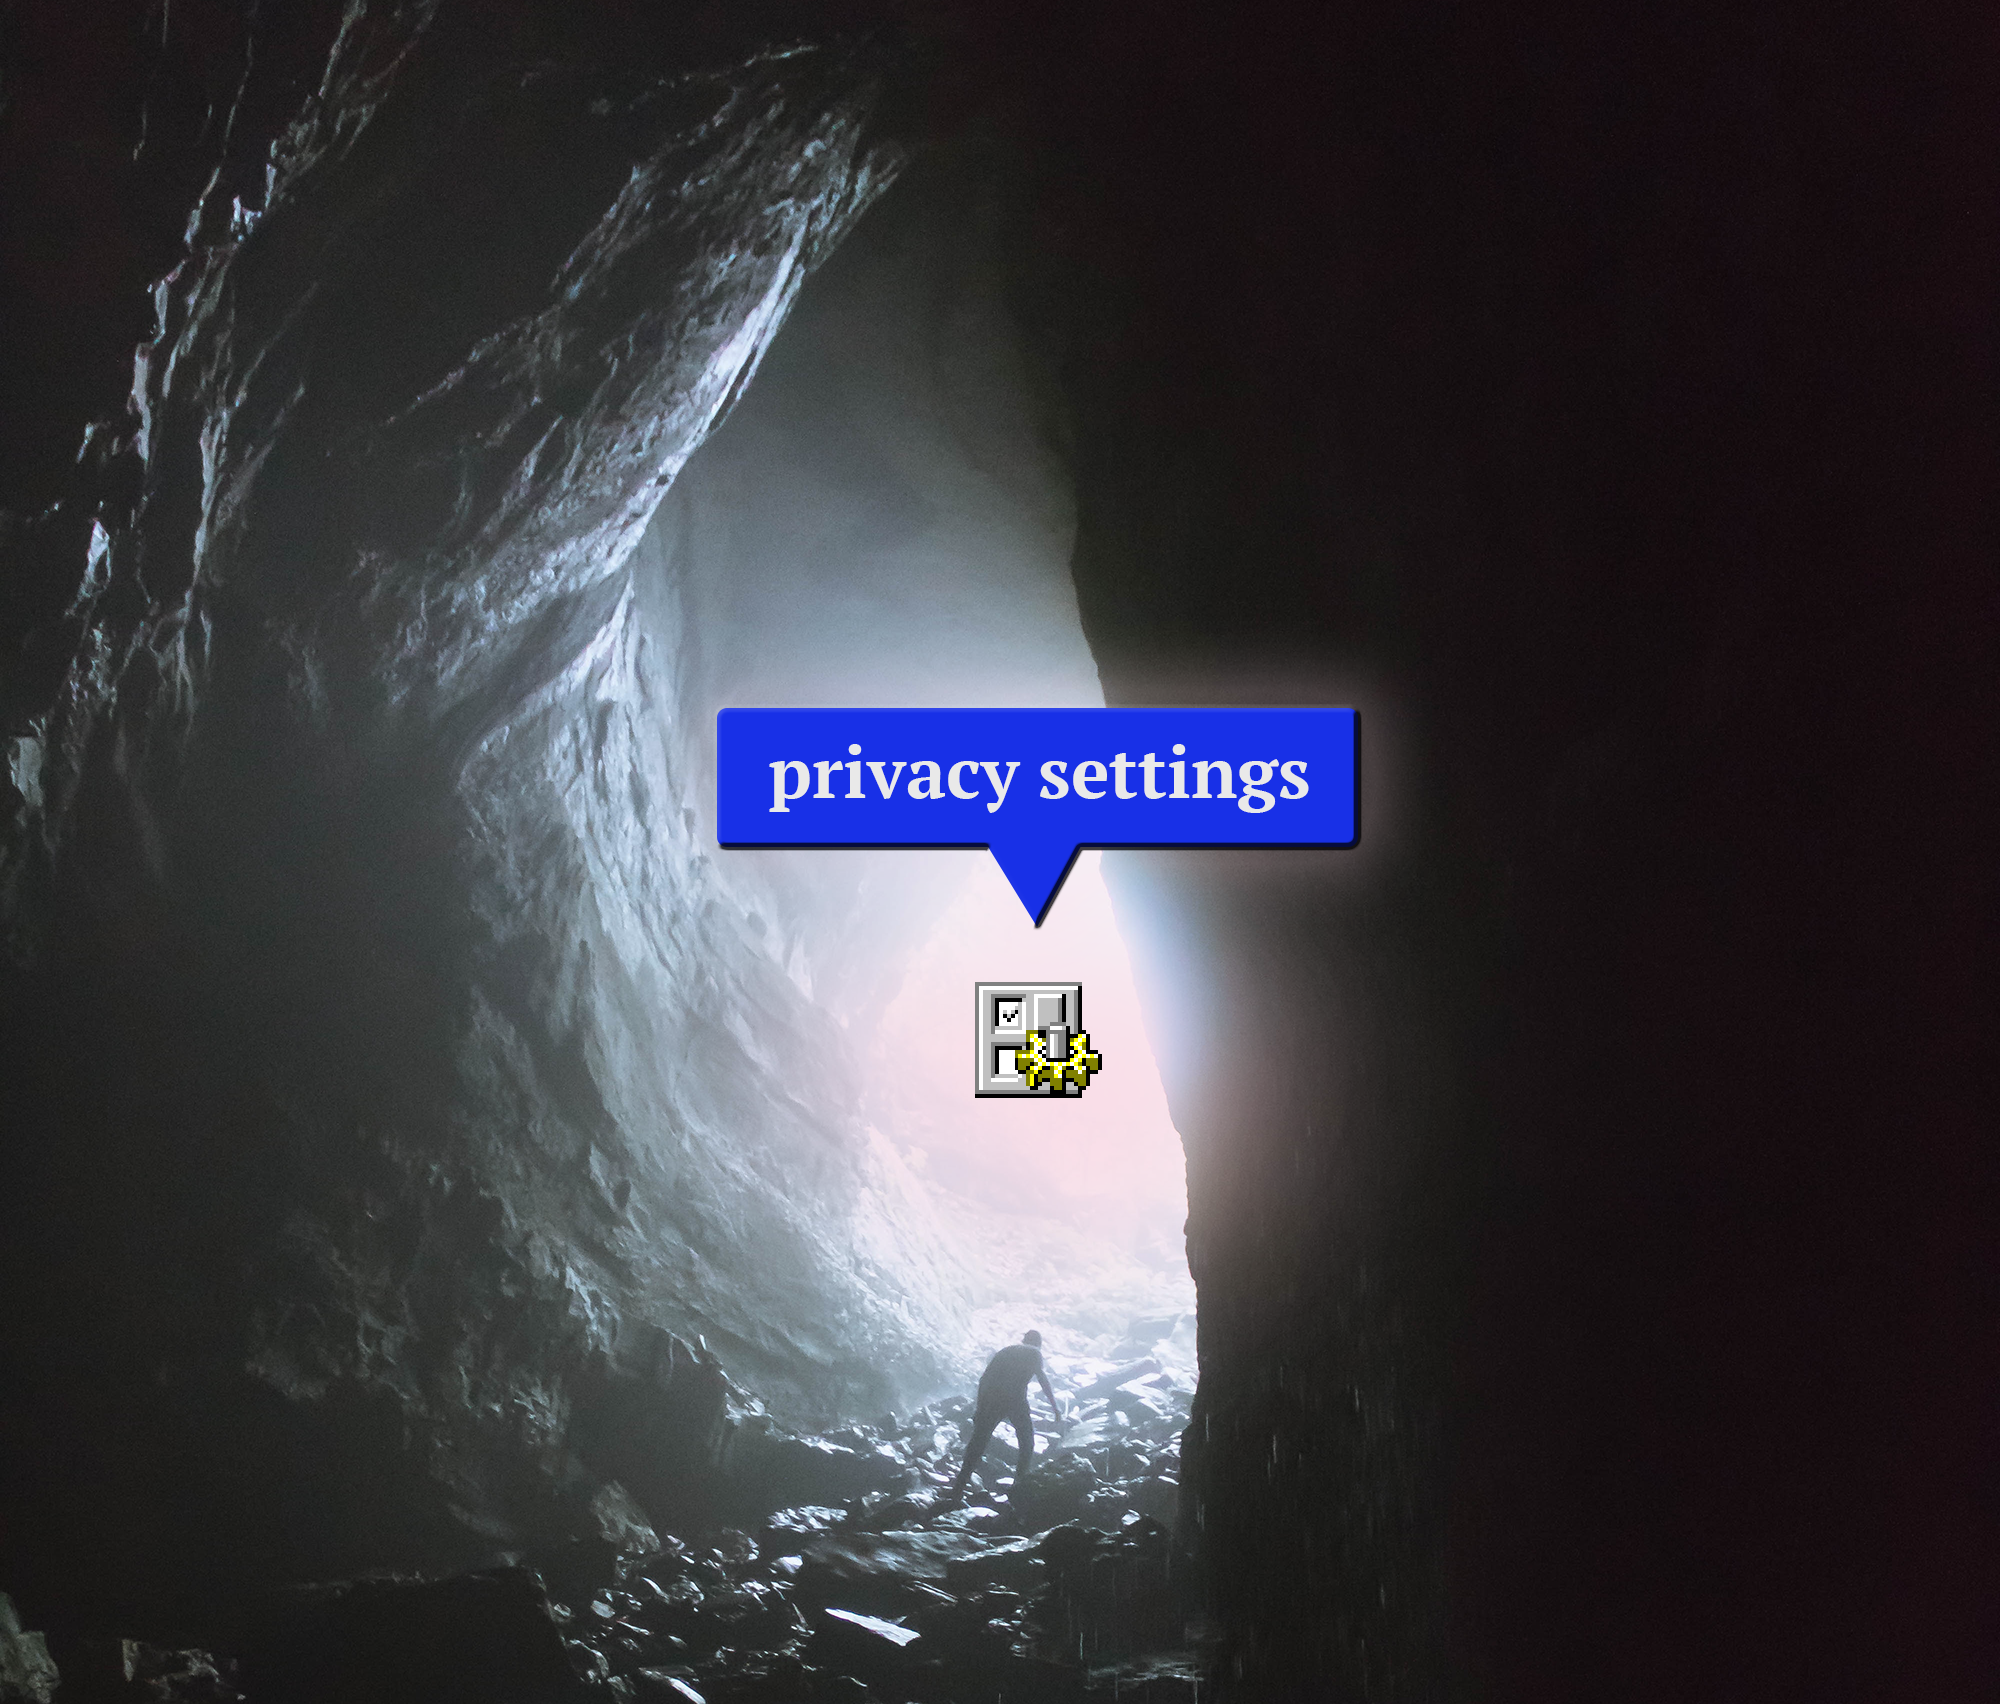 finding privacy settings in a cave